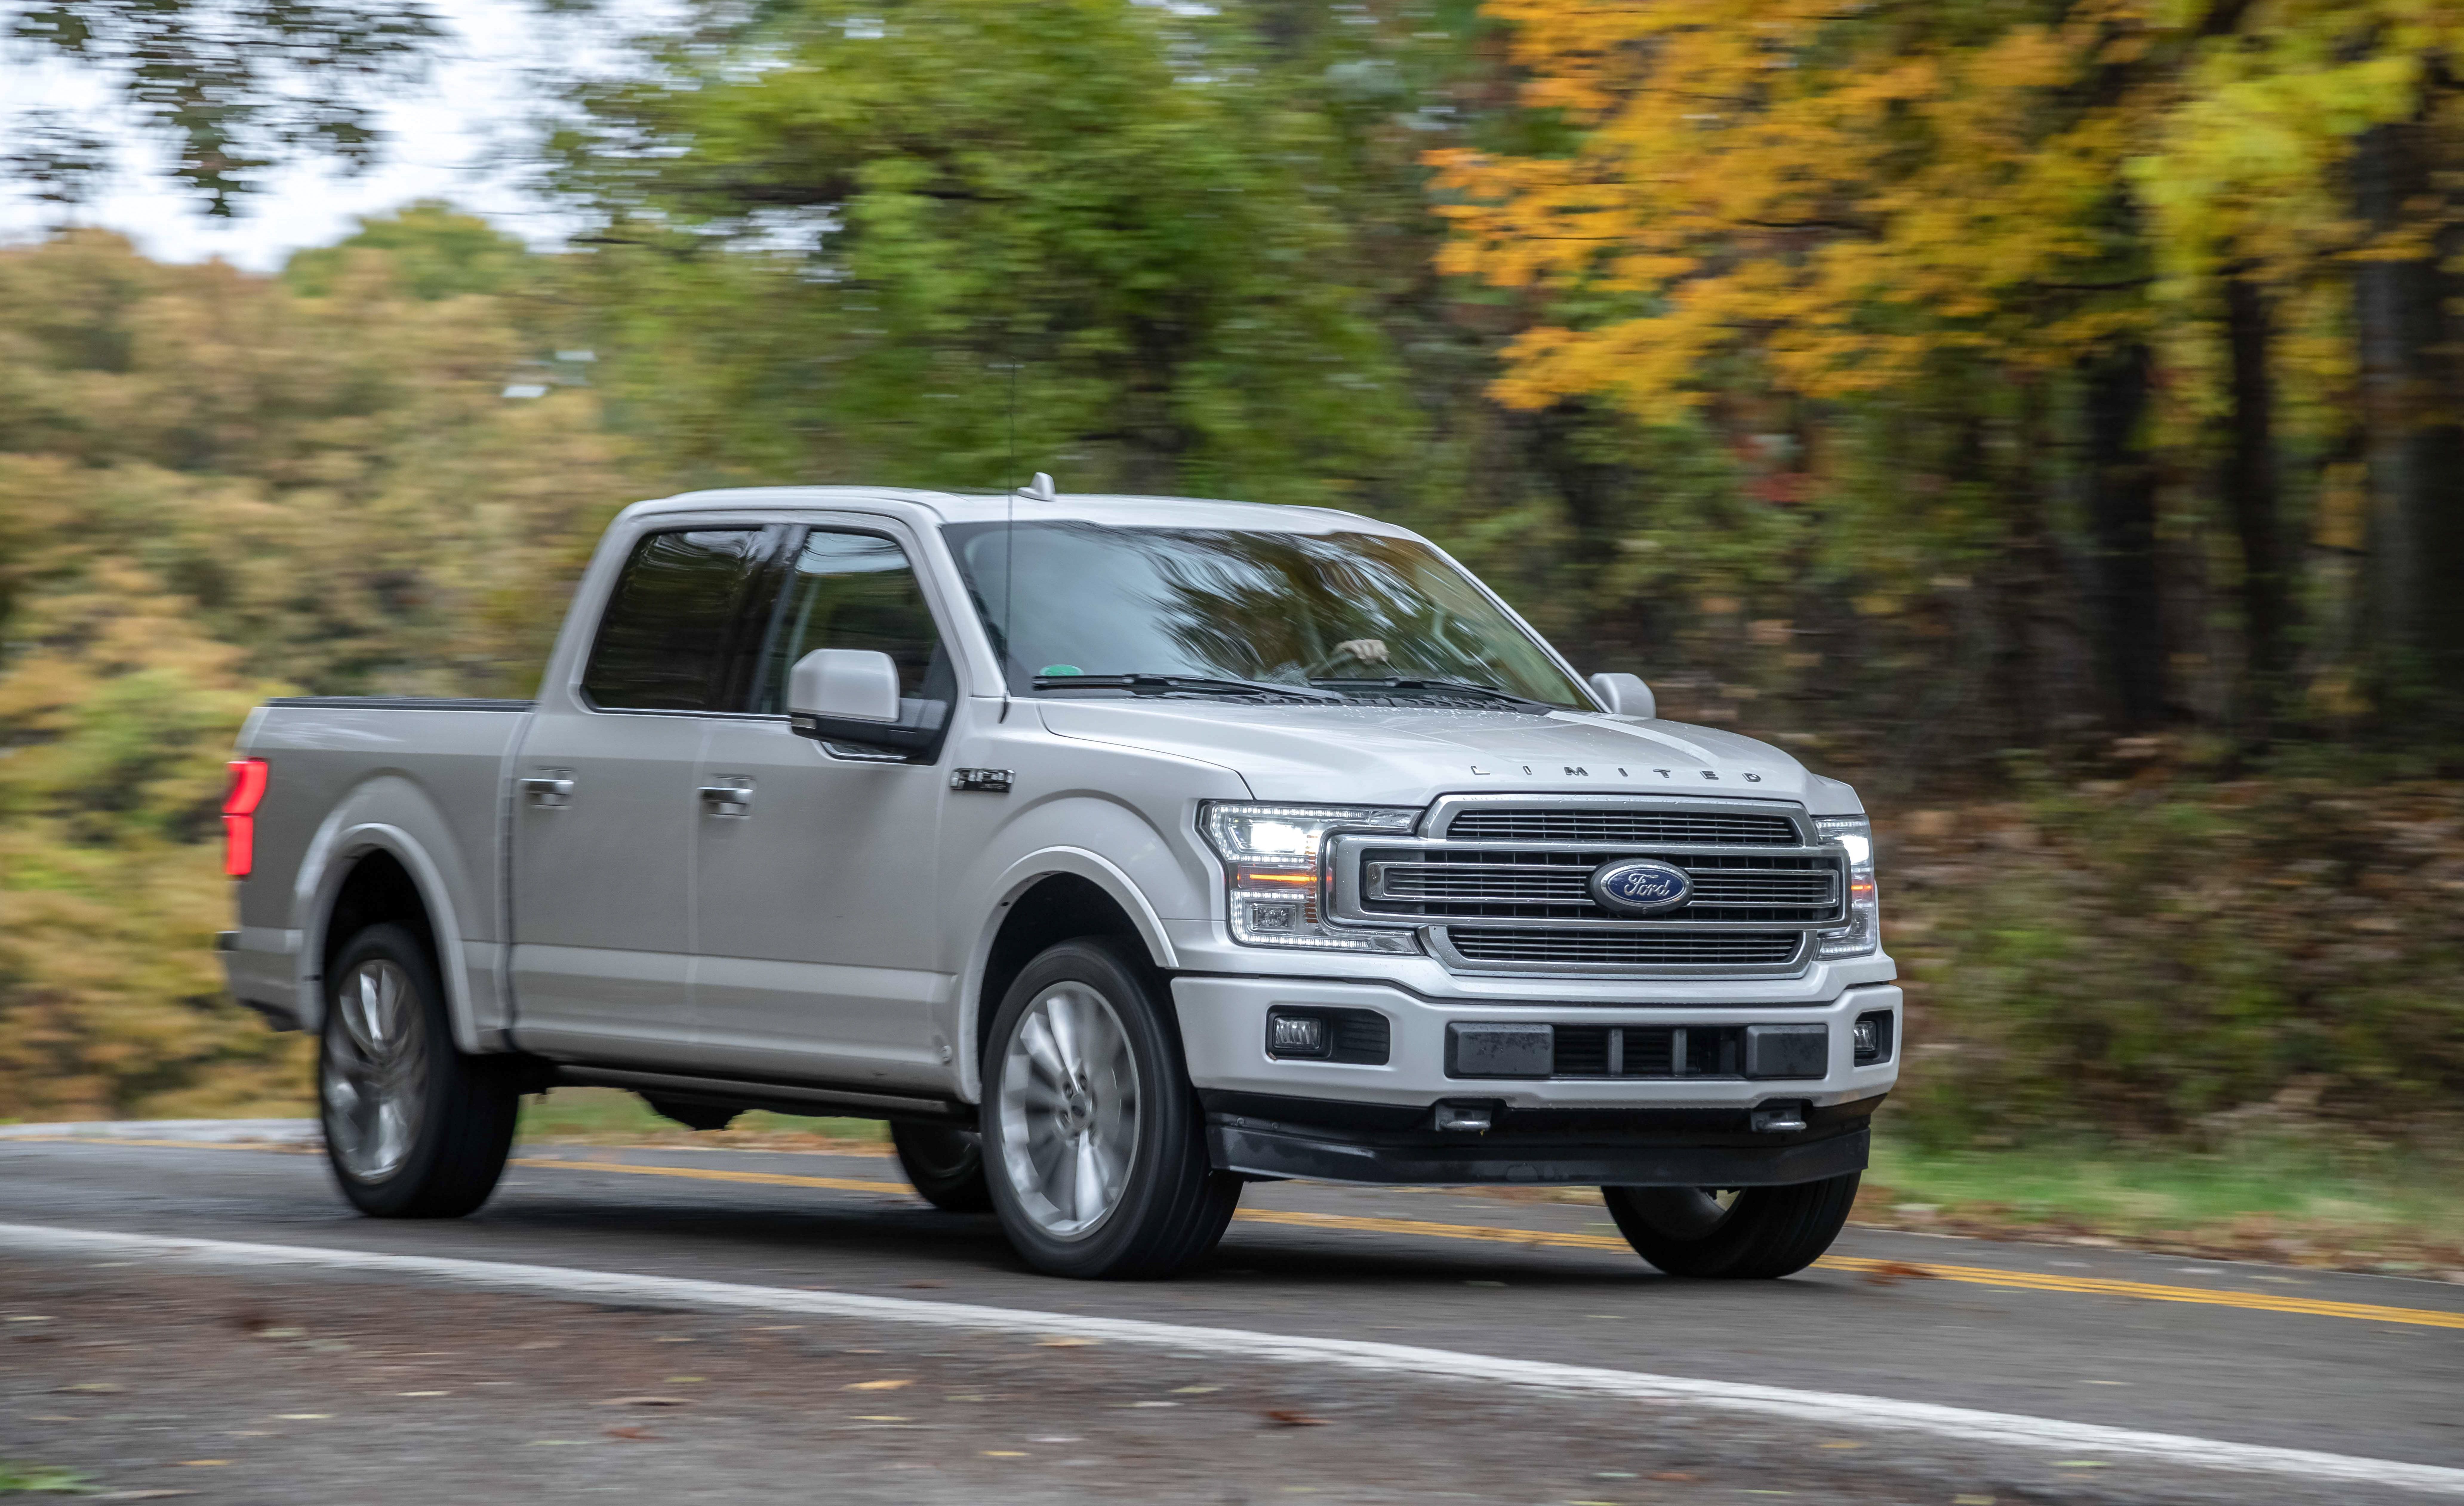 2019 Ford F-150 review: Popular pickup keeps on truckin' - CNET